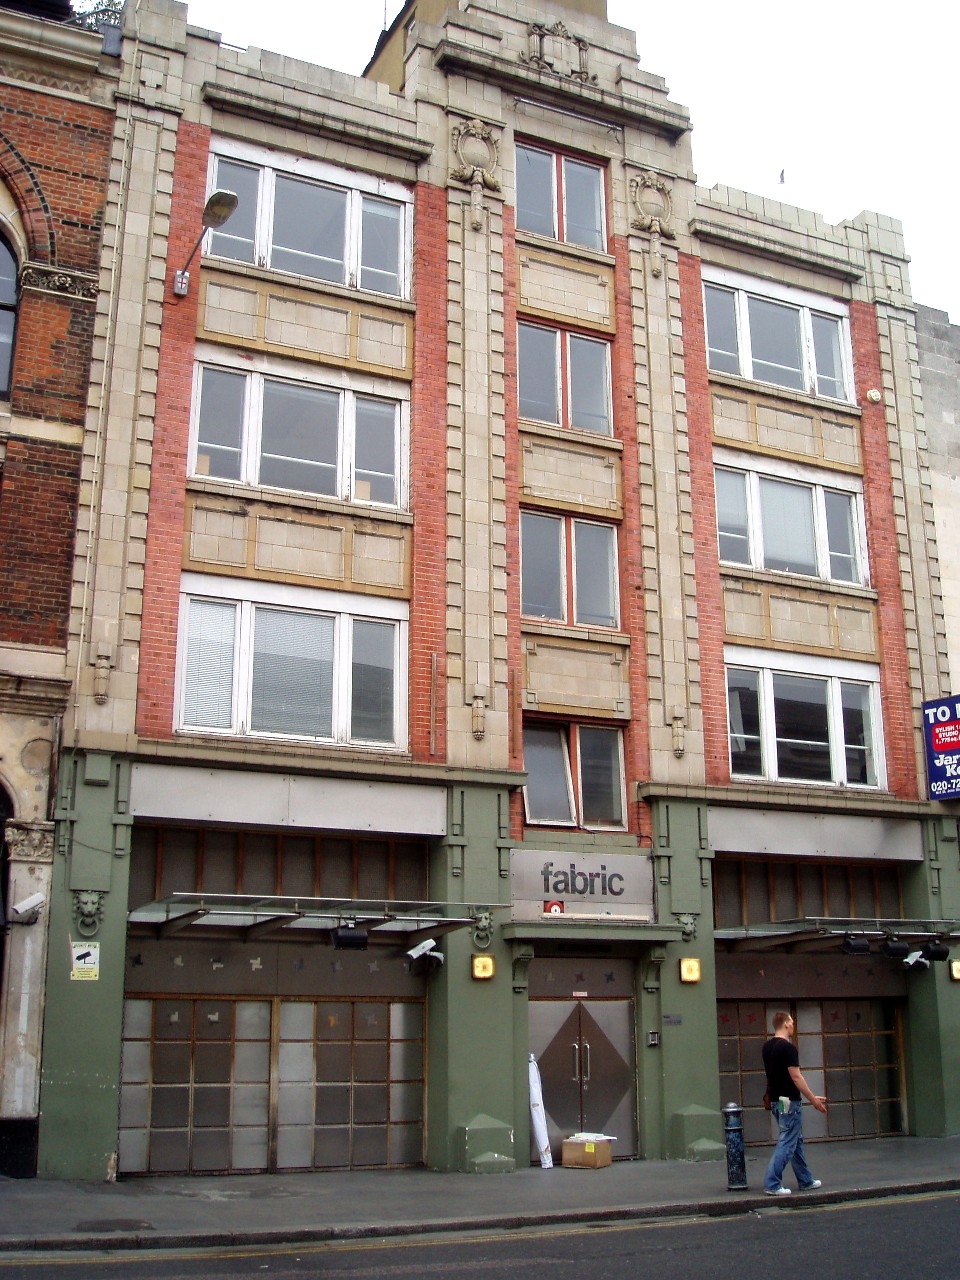 Colour photograph of the exterior of a three–storey red brick building with the entrance to a nightclub on street level.